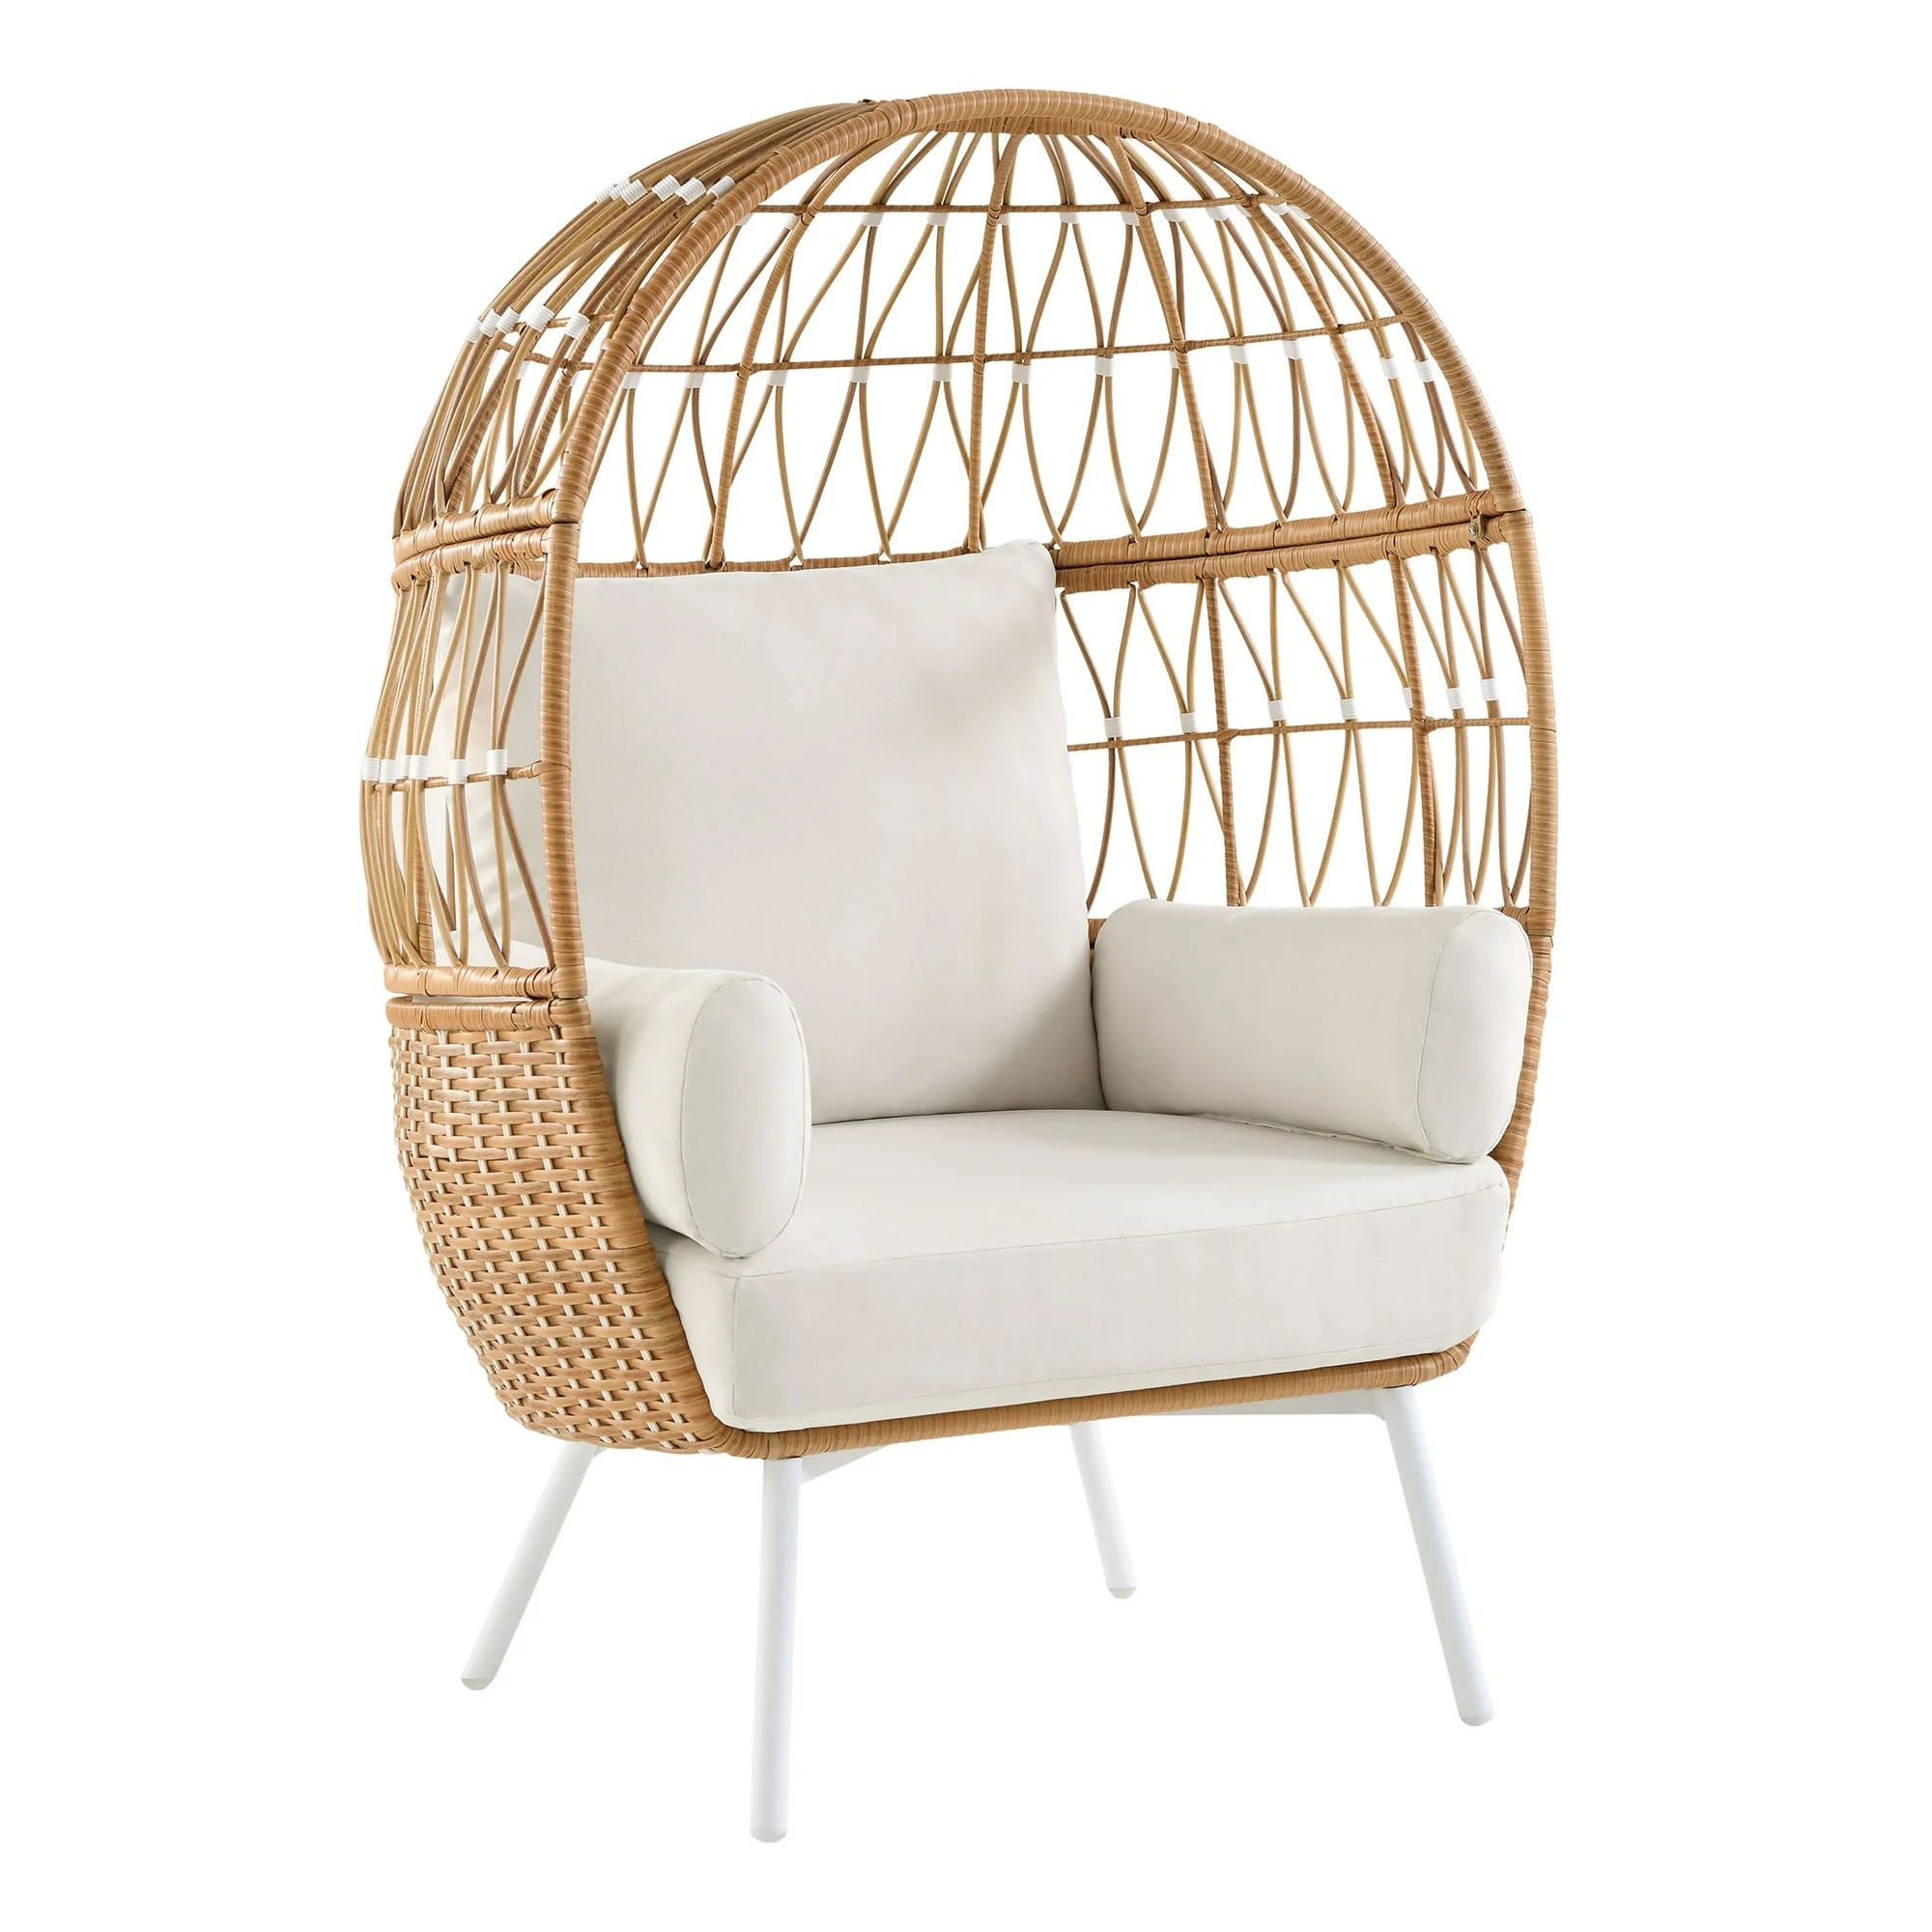 Better Homes and Gardens Lilah Boho Outdoor Stationary Wicker Egg Chair; White | Walmart (US)